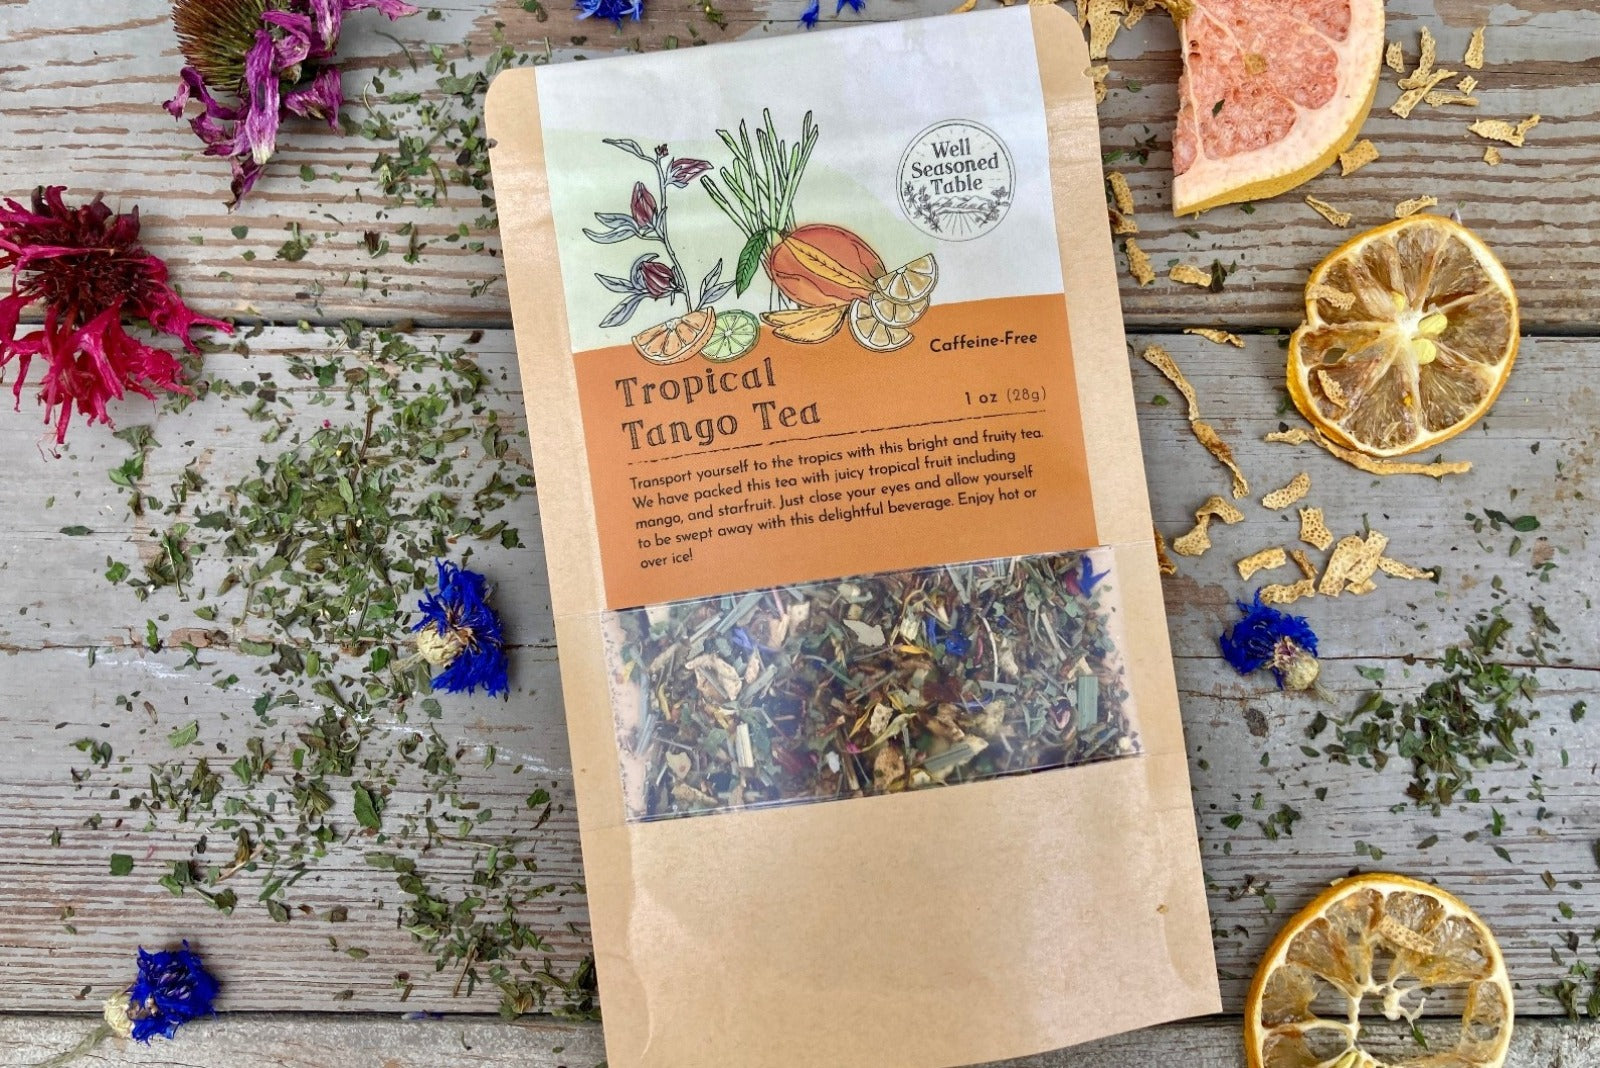 A packet of Tropical Tango Tea from Well Seasoned Table on a wooden background surrounded by dried herbs, flowers, and fruits.